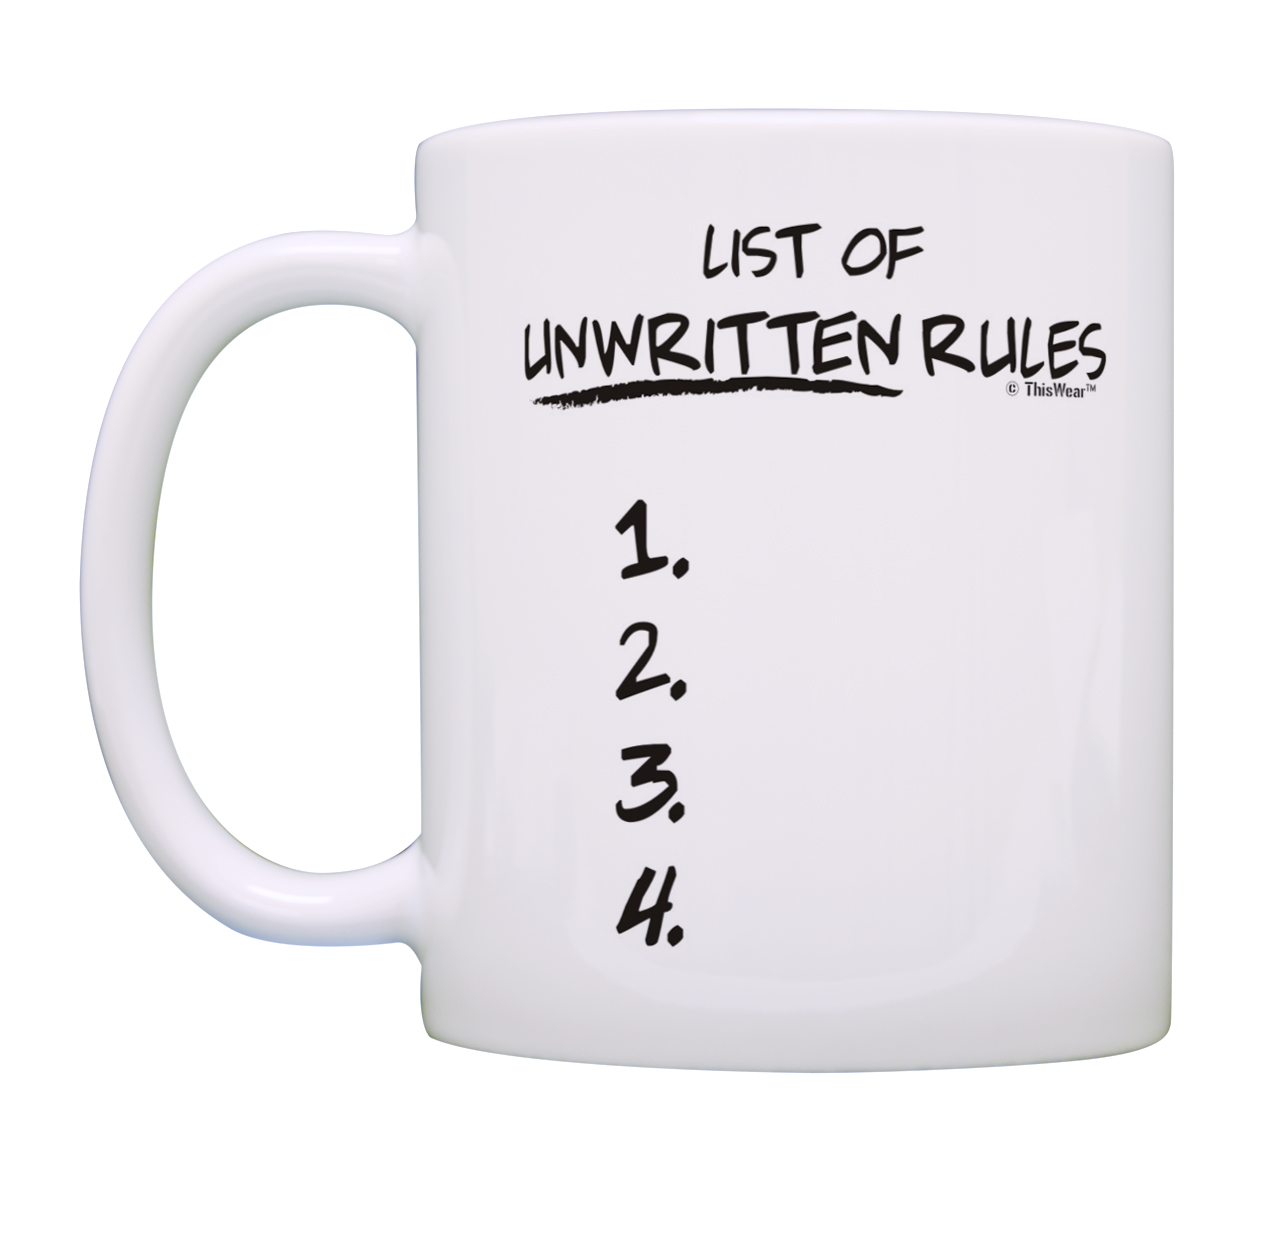 ThisWear Funny Quote Mugs List Of Unwritten Rules Funny Coffee Mug Set Humorous Mugs Sarcasm Mugs Office Coffee Mug Set 11 ounce 2 Pack Coffee Mugs - image 2 of 4